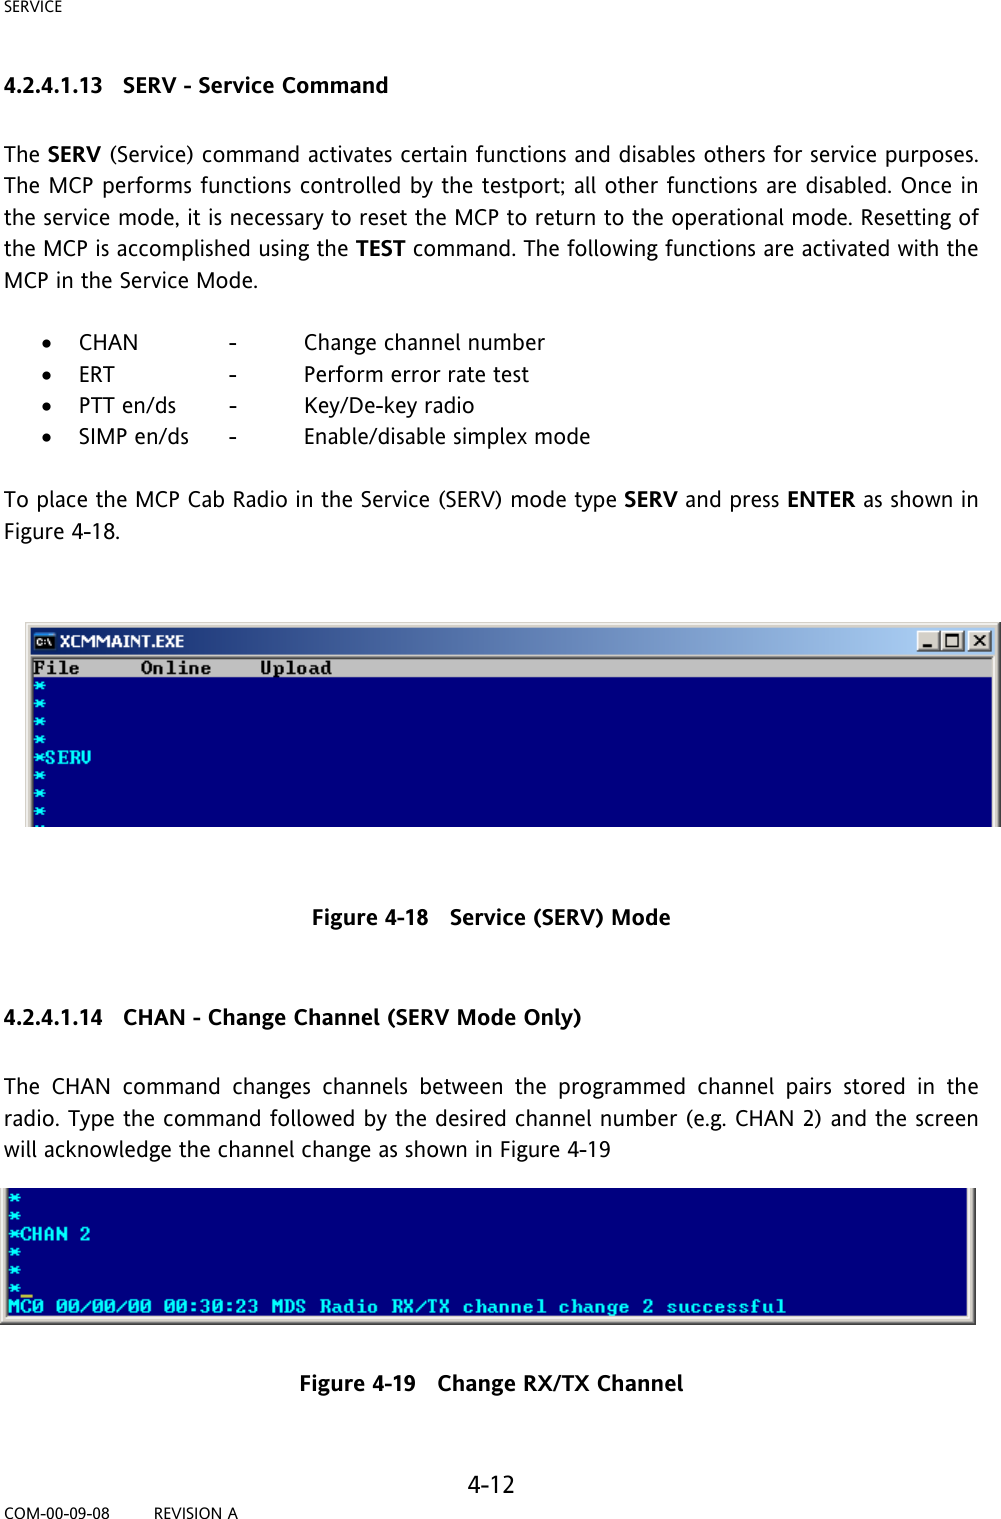 SERVICE     4-12 COM-00-09-08         REVISION A 4.2.4.1.13   SERV - Service Command  The SERV (Service) command activates certain functions and disables others for service purposes. The MCP performs functions controlled by the testport; all other functions are disabled. Once in the service mode, it is necessary to reset the MCP to return to the operational mode. Resetting of the MCP is accomplished using the TEST command. The following functions are activated with the MCP in the Service Mode.  • CHAN    -  Change channel number • ERT    -  Perform error rate test • PTT en/ds  -  Key/De-key radio • SIMP en/ds  -  Enable/disable simplex mode  To place the MCP Cab Radio in the Service (SERV) mode type SERV and press ENTER as shown in Figure 4-18.     Figure 4-18   Service (SERV) Mode  4.2.4.1.14   CHAN - Change Channel (SERV Mode Only)  The CHAN command changes channels between the programmed channel pairs stored in the radio. Type the command followed by the desired channel number (e.g. CHAN 2) and the screen will acknowledge the channel change as shown in Figure 4-19  Figure 4-19   Change RX/TX Channel  